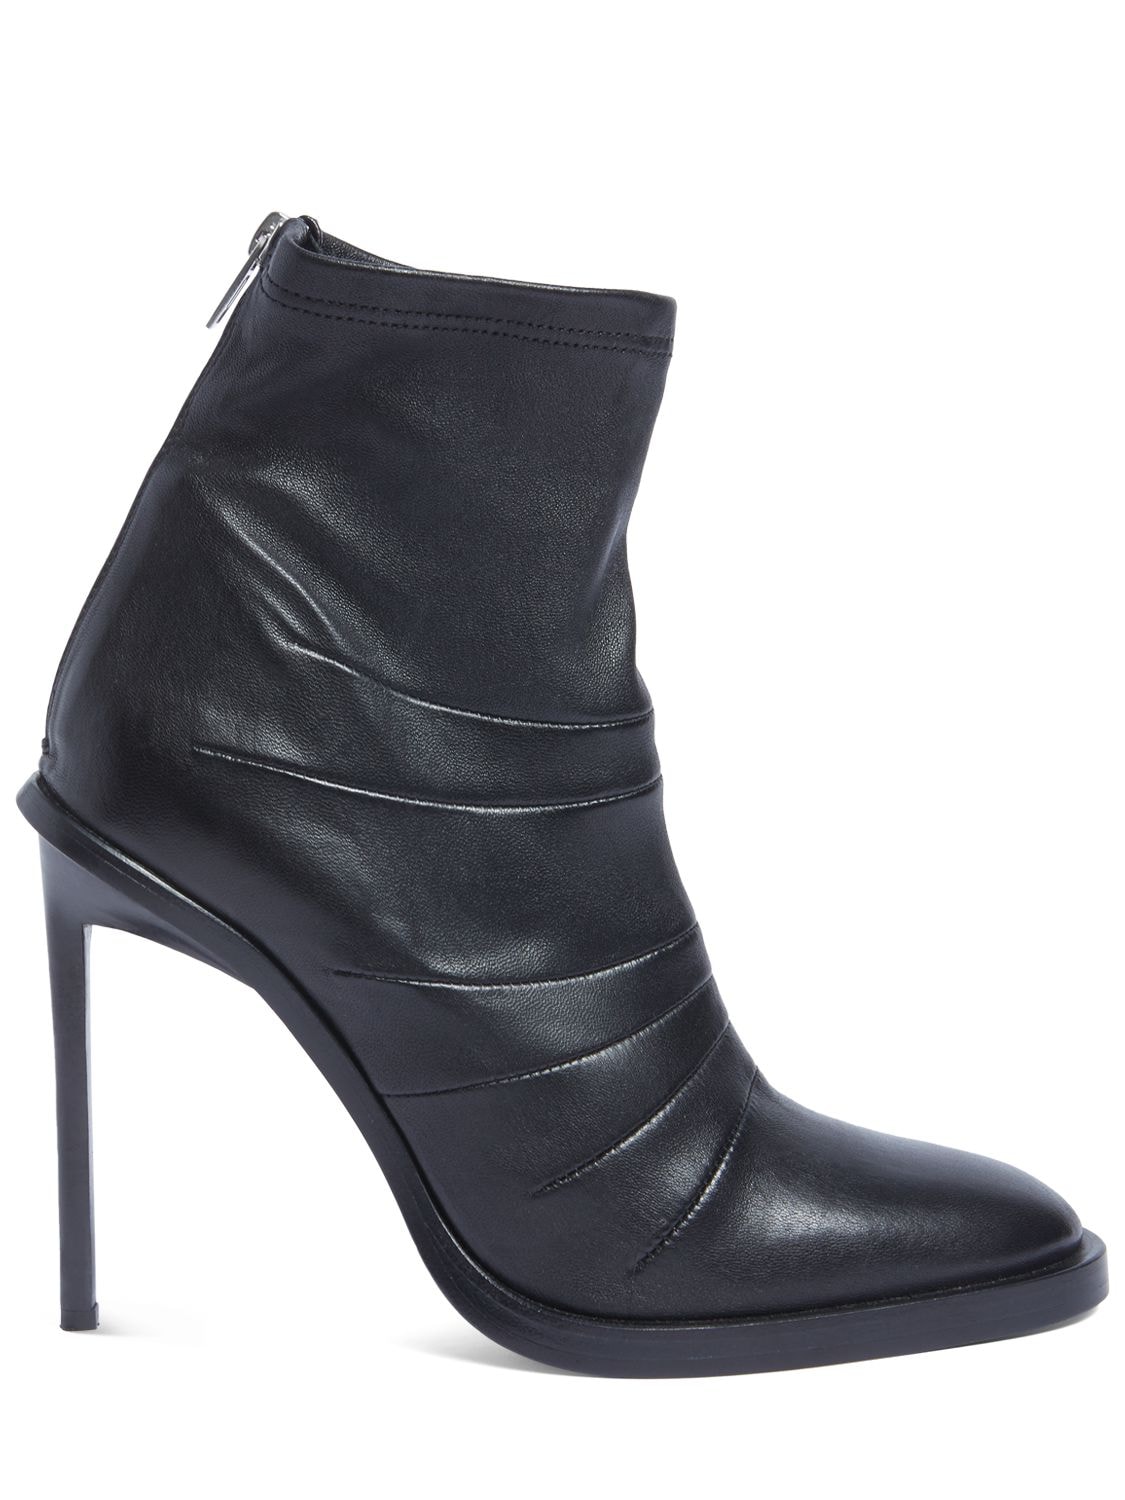 Image of 110mm Carol High Heel Ankle Boots